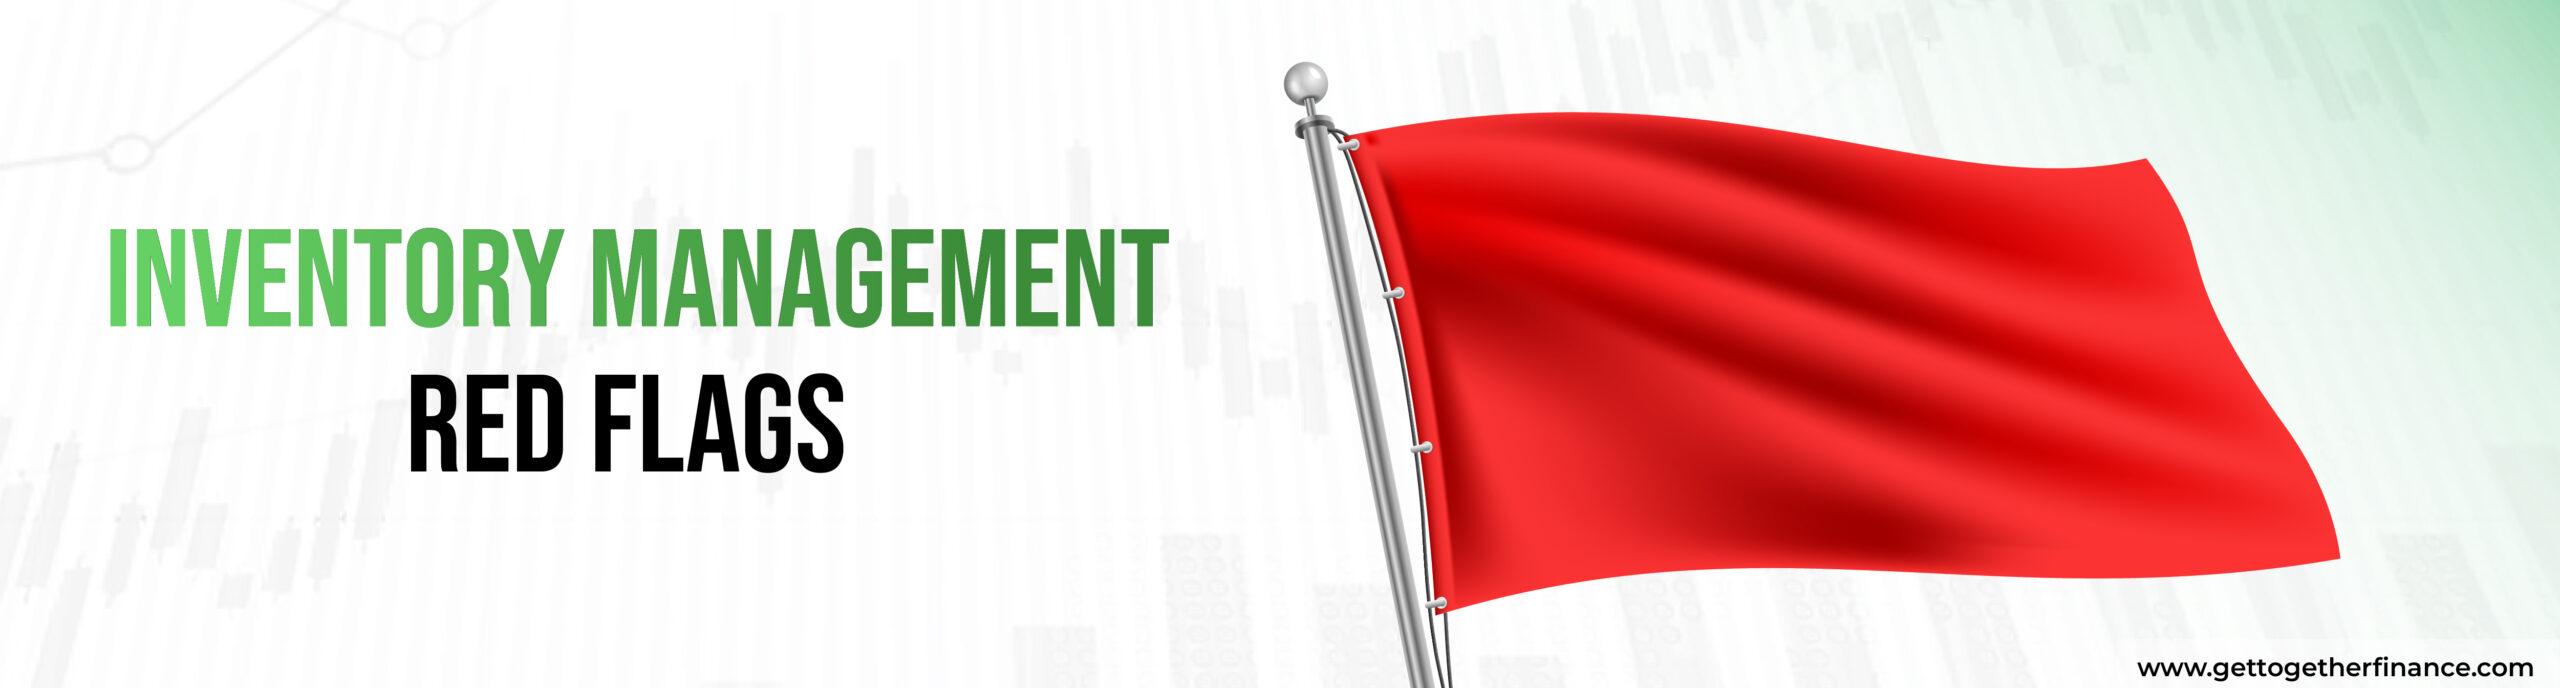 inventory management red flags